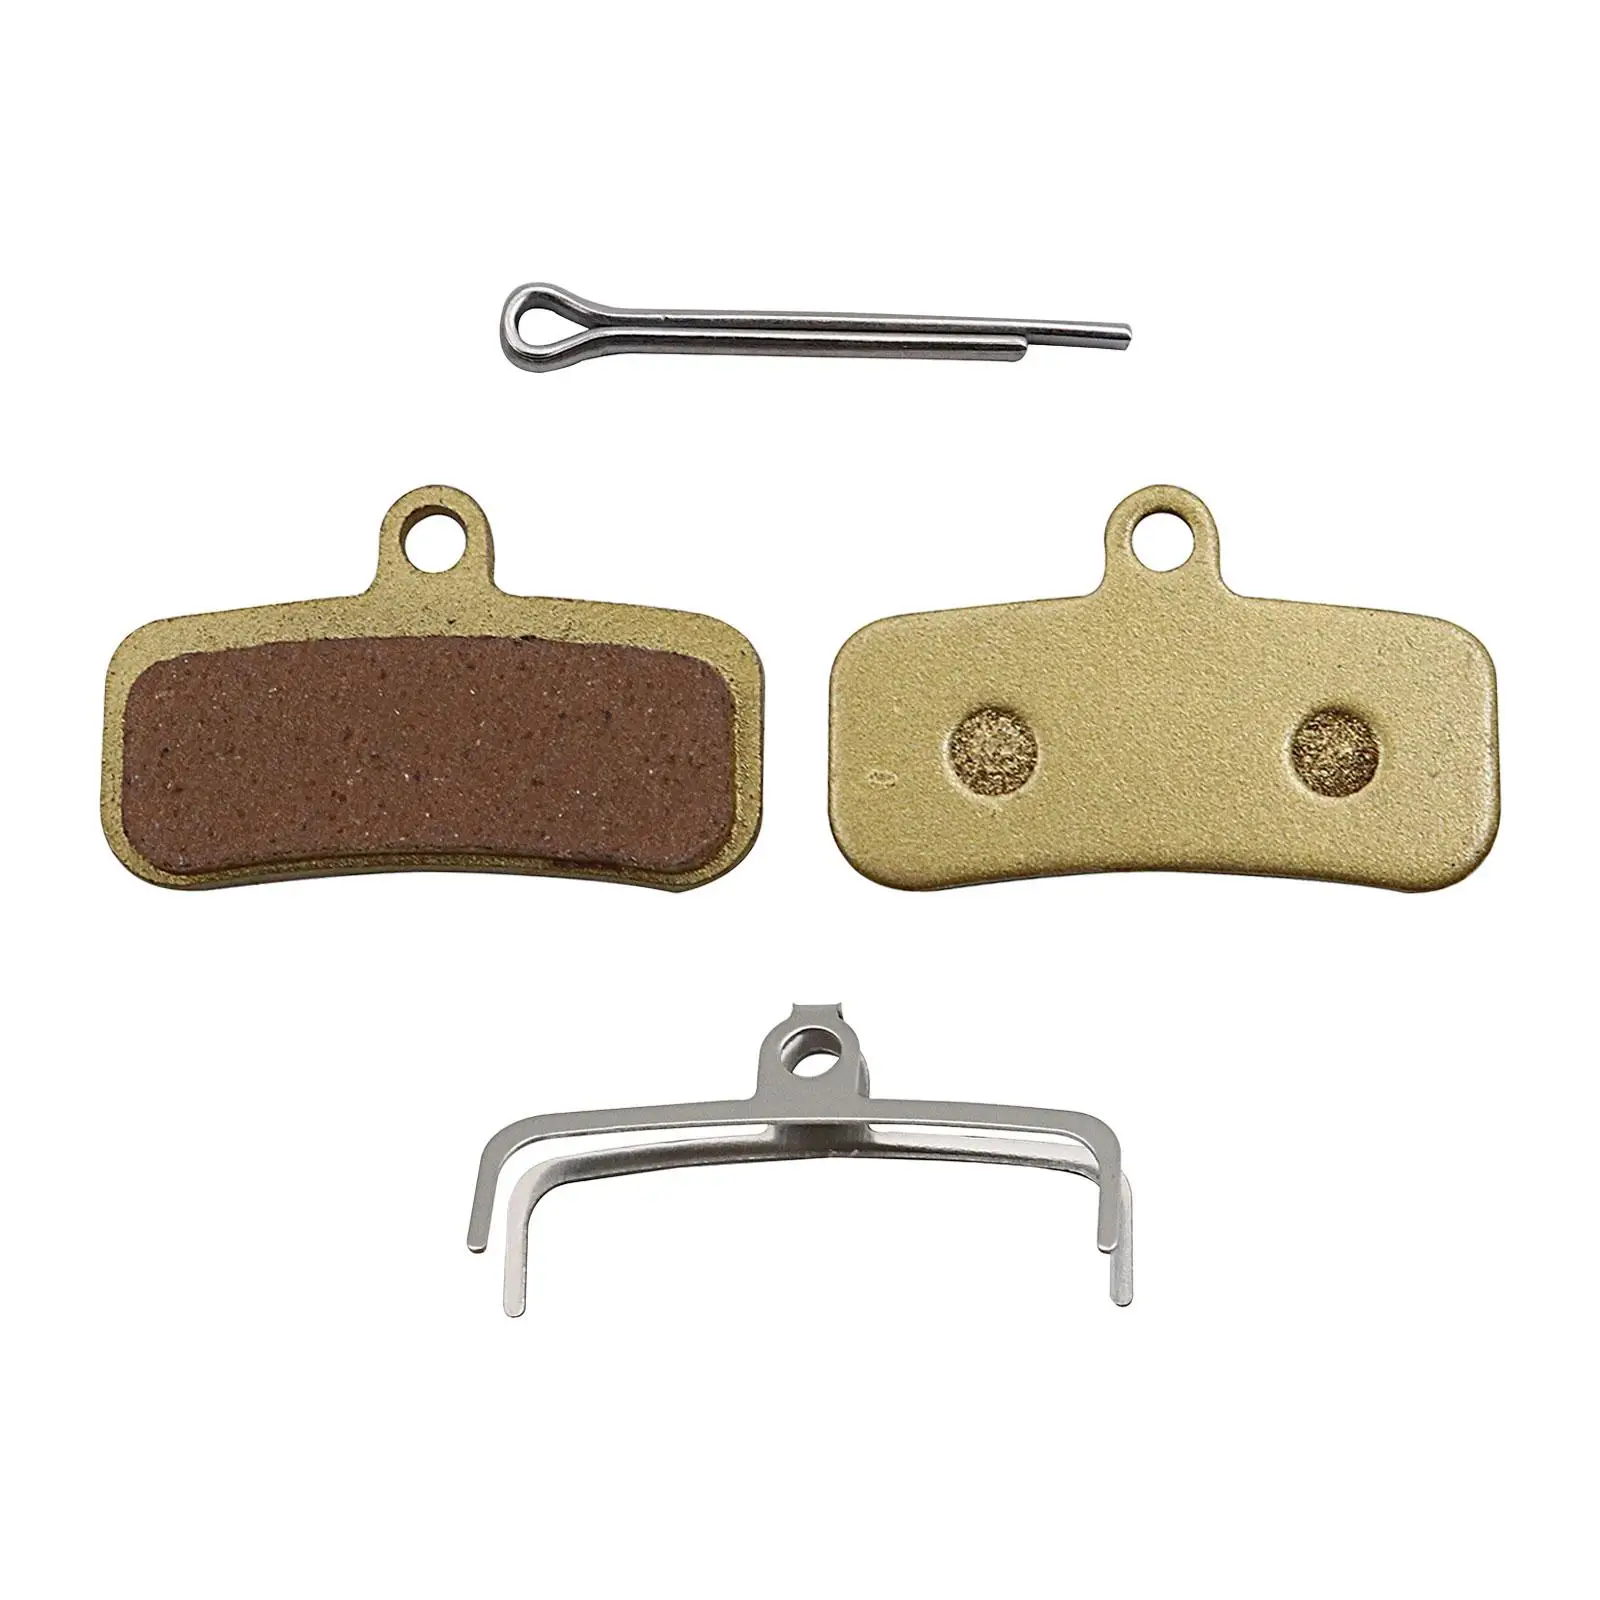 2 Pieces Motorcycle Front and Rear Brake Pads Brake Pad for Surron